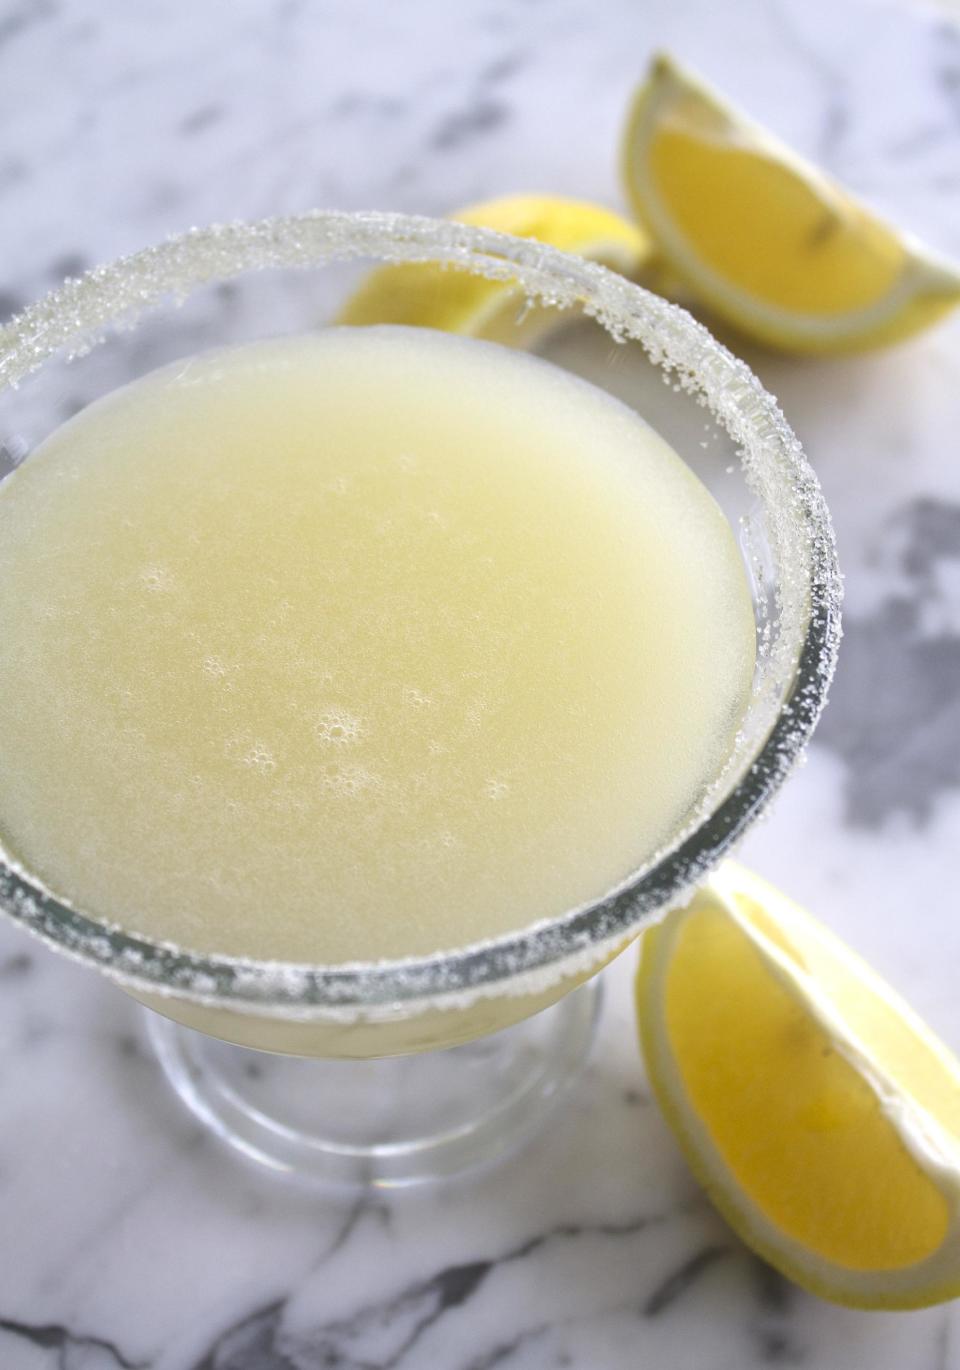 In this image taken on May 22, 2013, a sweet broiled lemon margarita is shown in Concord, N.H. (AP Photo/J.M. Hirsch)